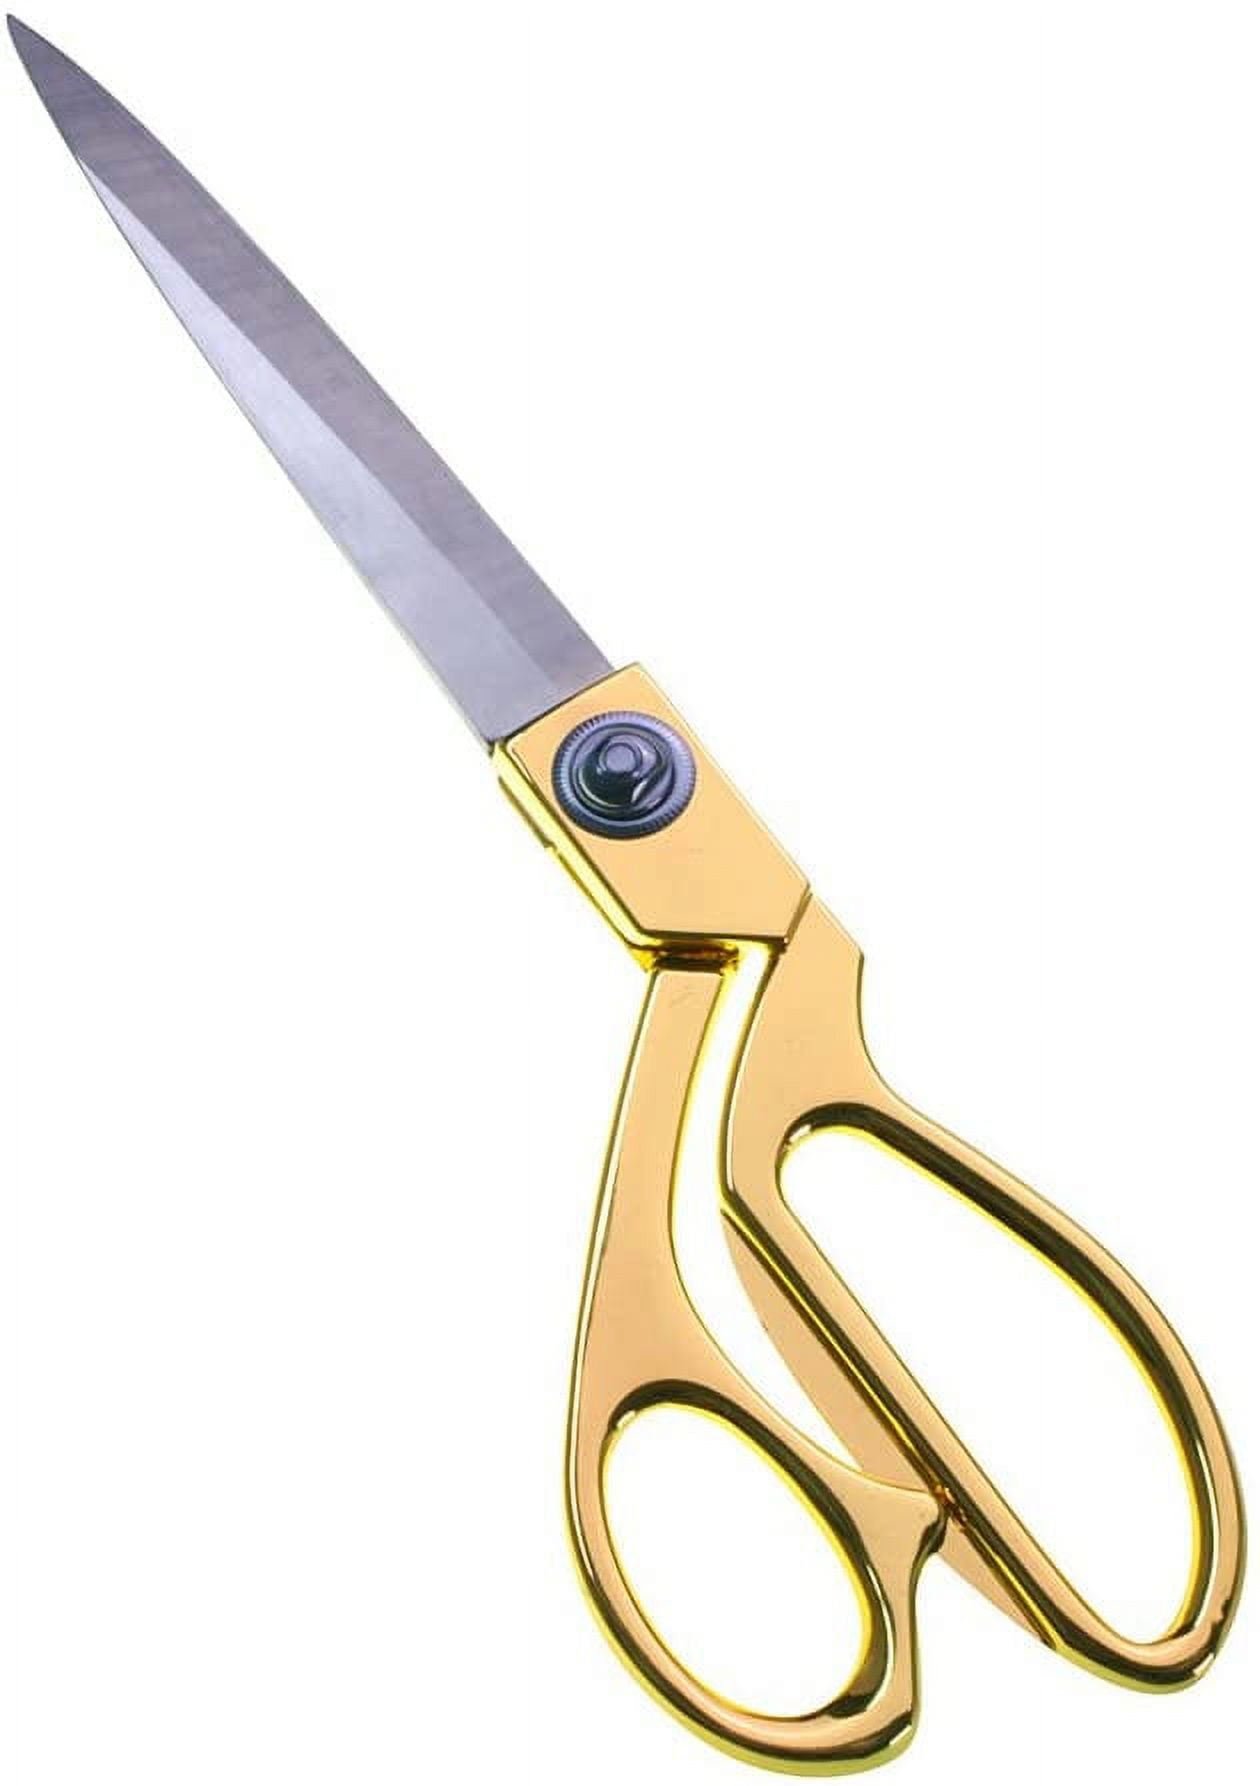 Aemoe 5inch All Stainless Steel Office Scissors,Ultra Sharp Blade Shears,Sturdy  Sharp Scissors for Office Home School Sewing Fabric Craft Supplies  Multipurpose Scissors Gold(SC0005-GOLD-S) 5 Gold